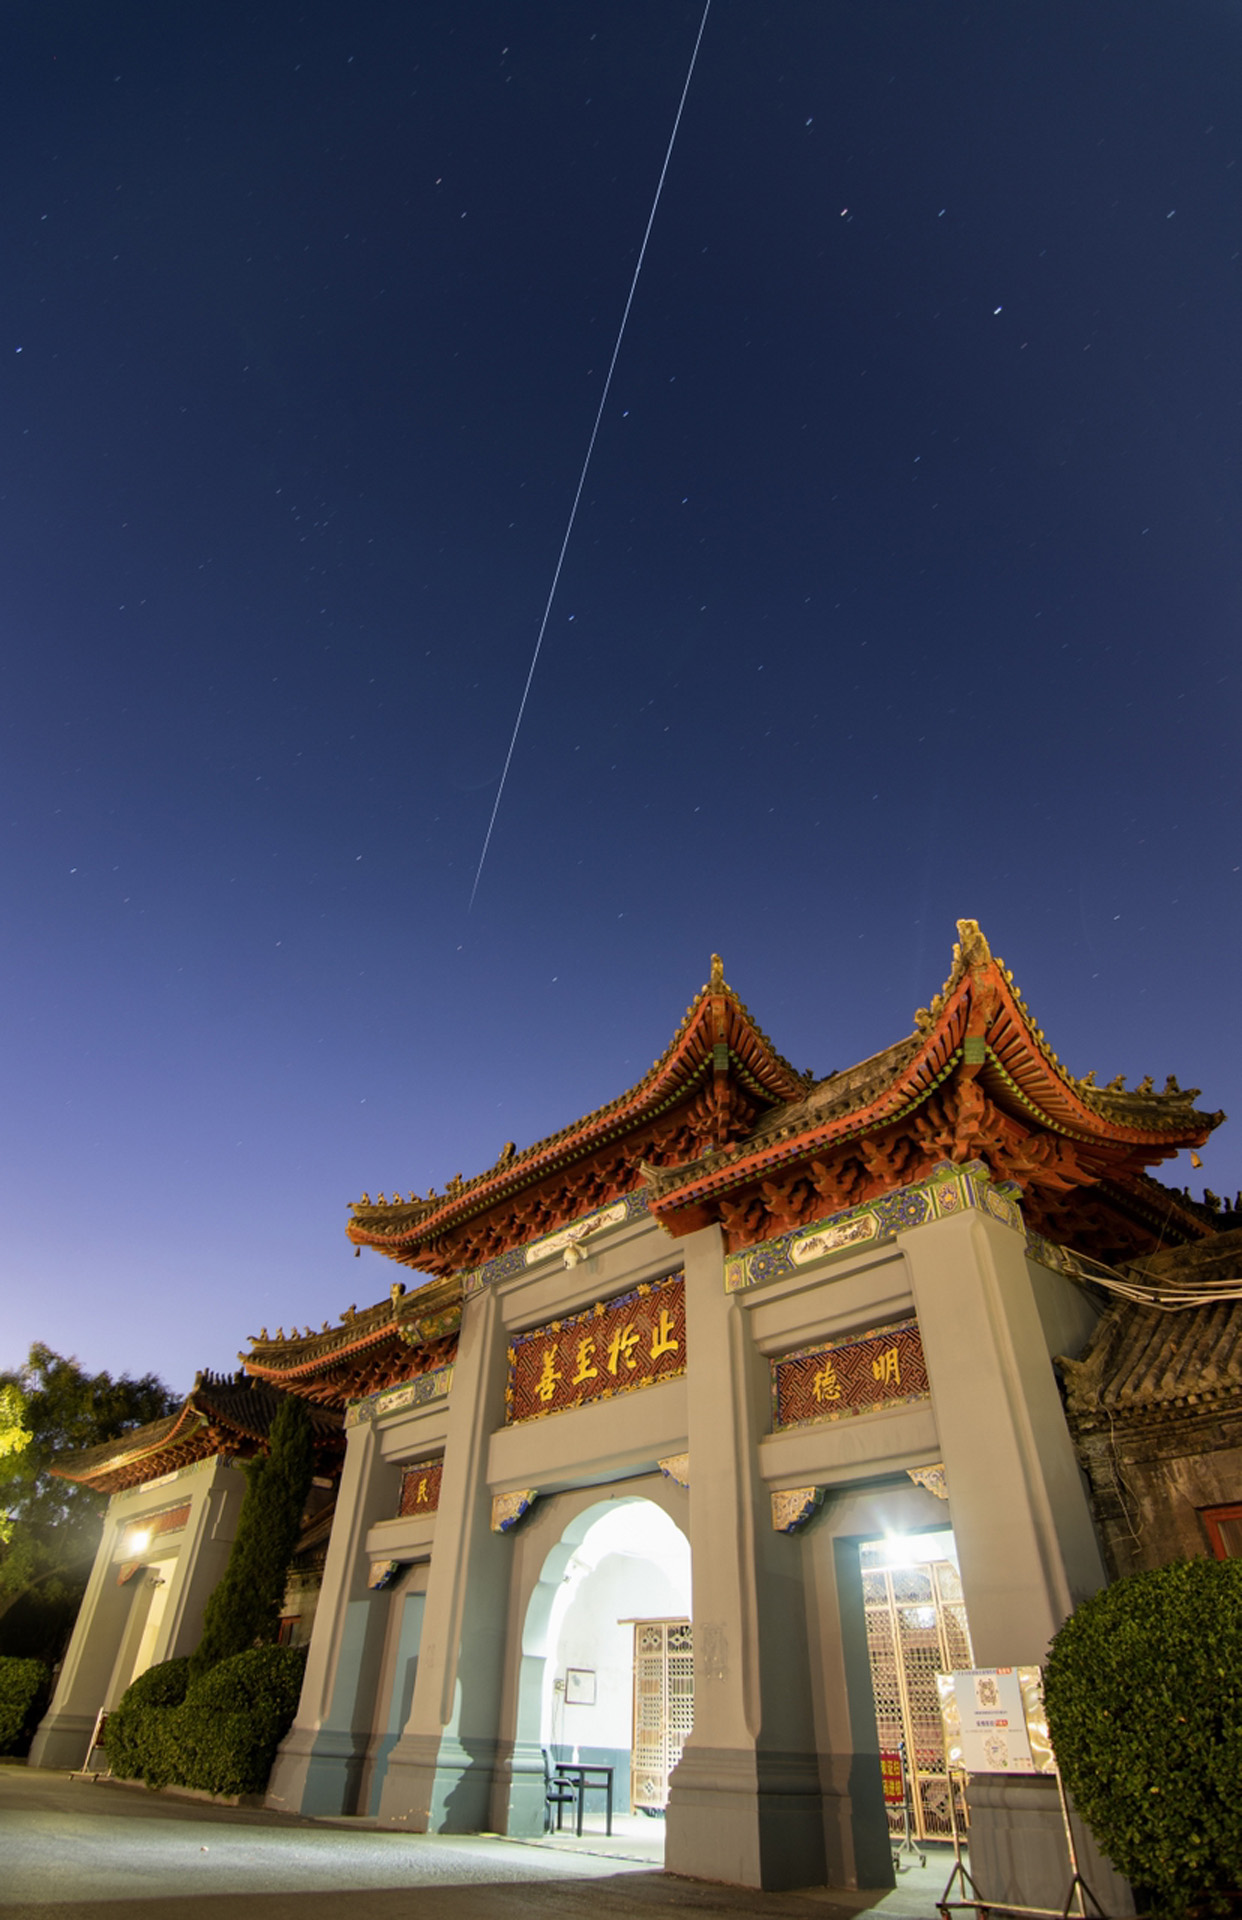 China's space station flies across the sky above Kaifeng City, central China's Henan Province, November 25, 2021. /Zhang Yixiao